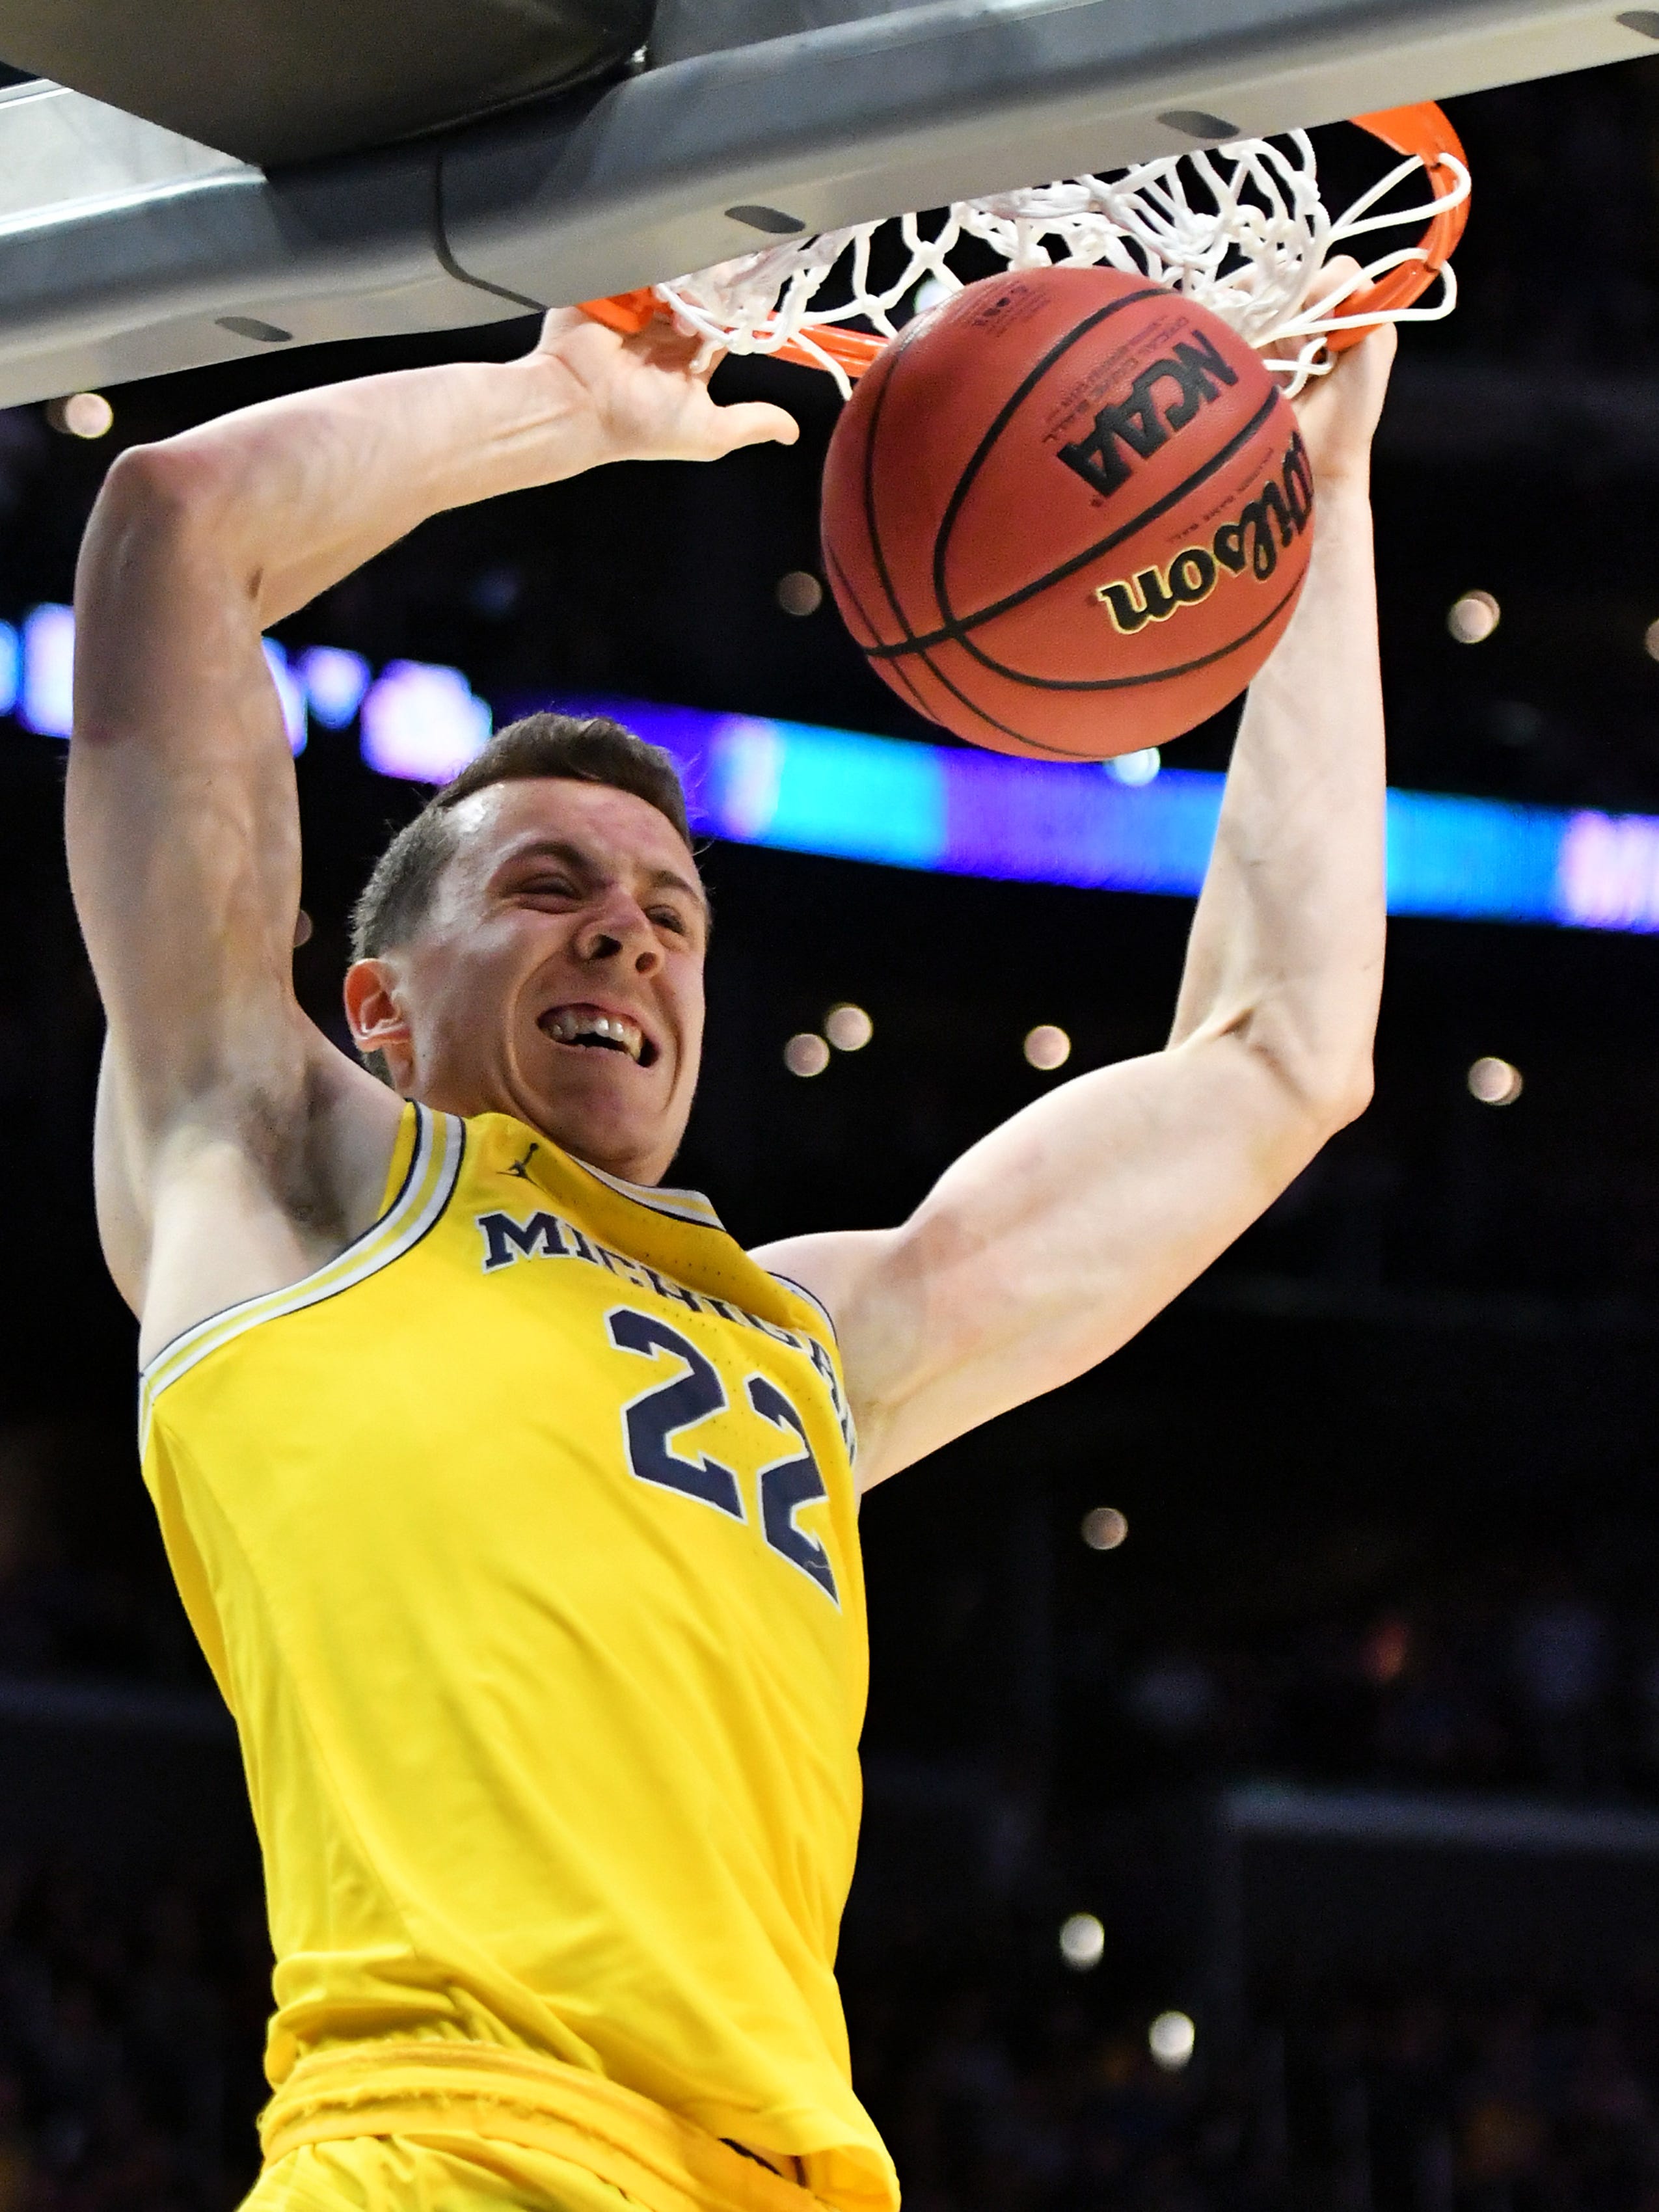 Duncan Robinson, F, senior: Robinson, the Big Ten sixth man of the year, began the season as a starter before moving to the bench. He made a team-high 78 3-pointers, shot 38.4 percent from the beyond the arc and his post defense was often overlooked for a three who was often playing the four. He became the first player to appear in both the Division III and Division I title game, where he finished his career on a sour note with a scoreless outing.